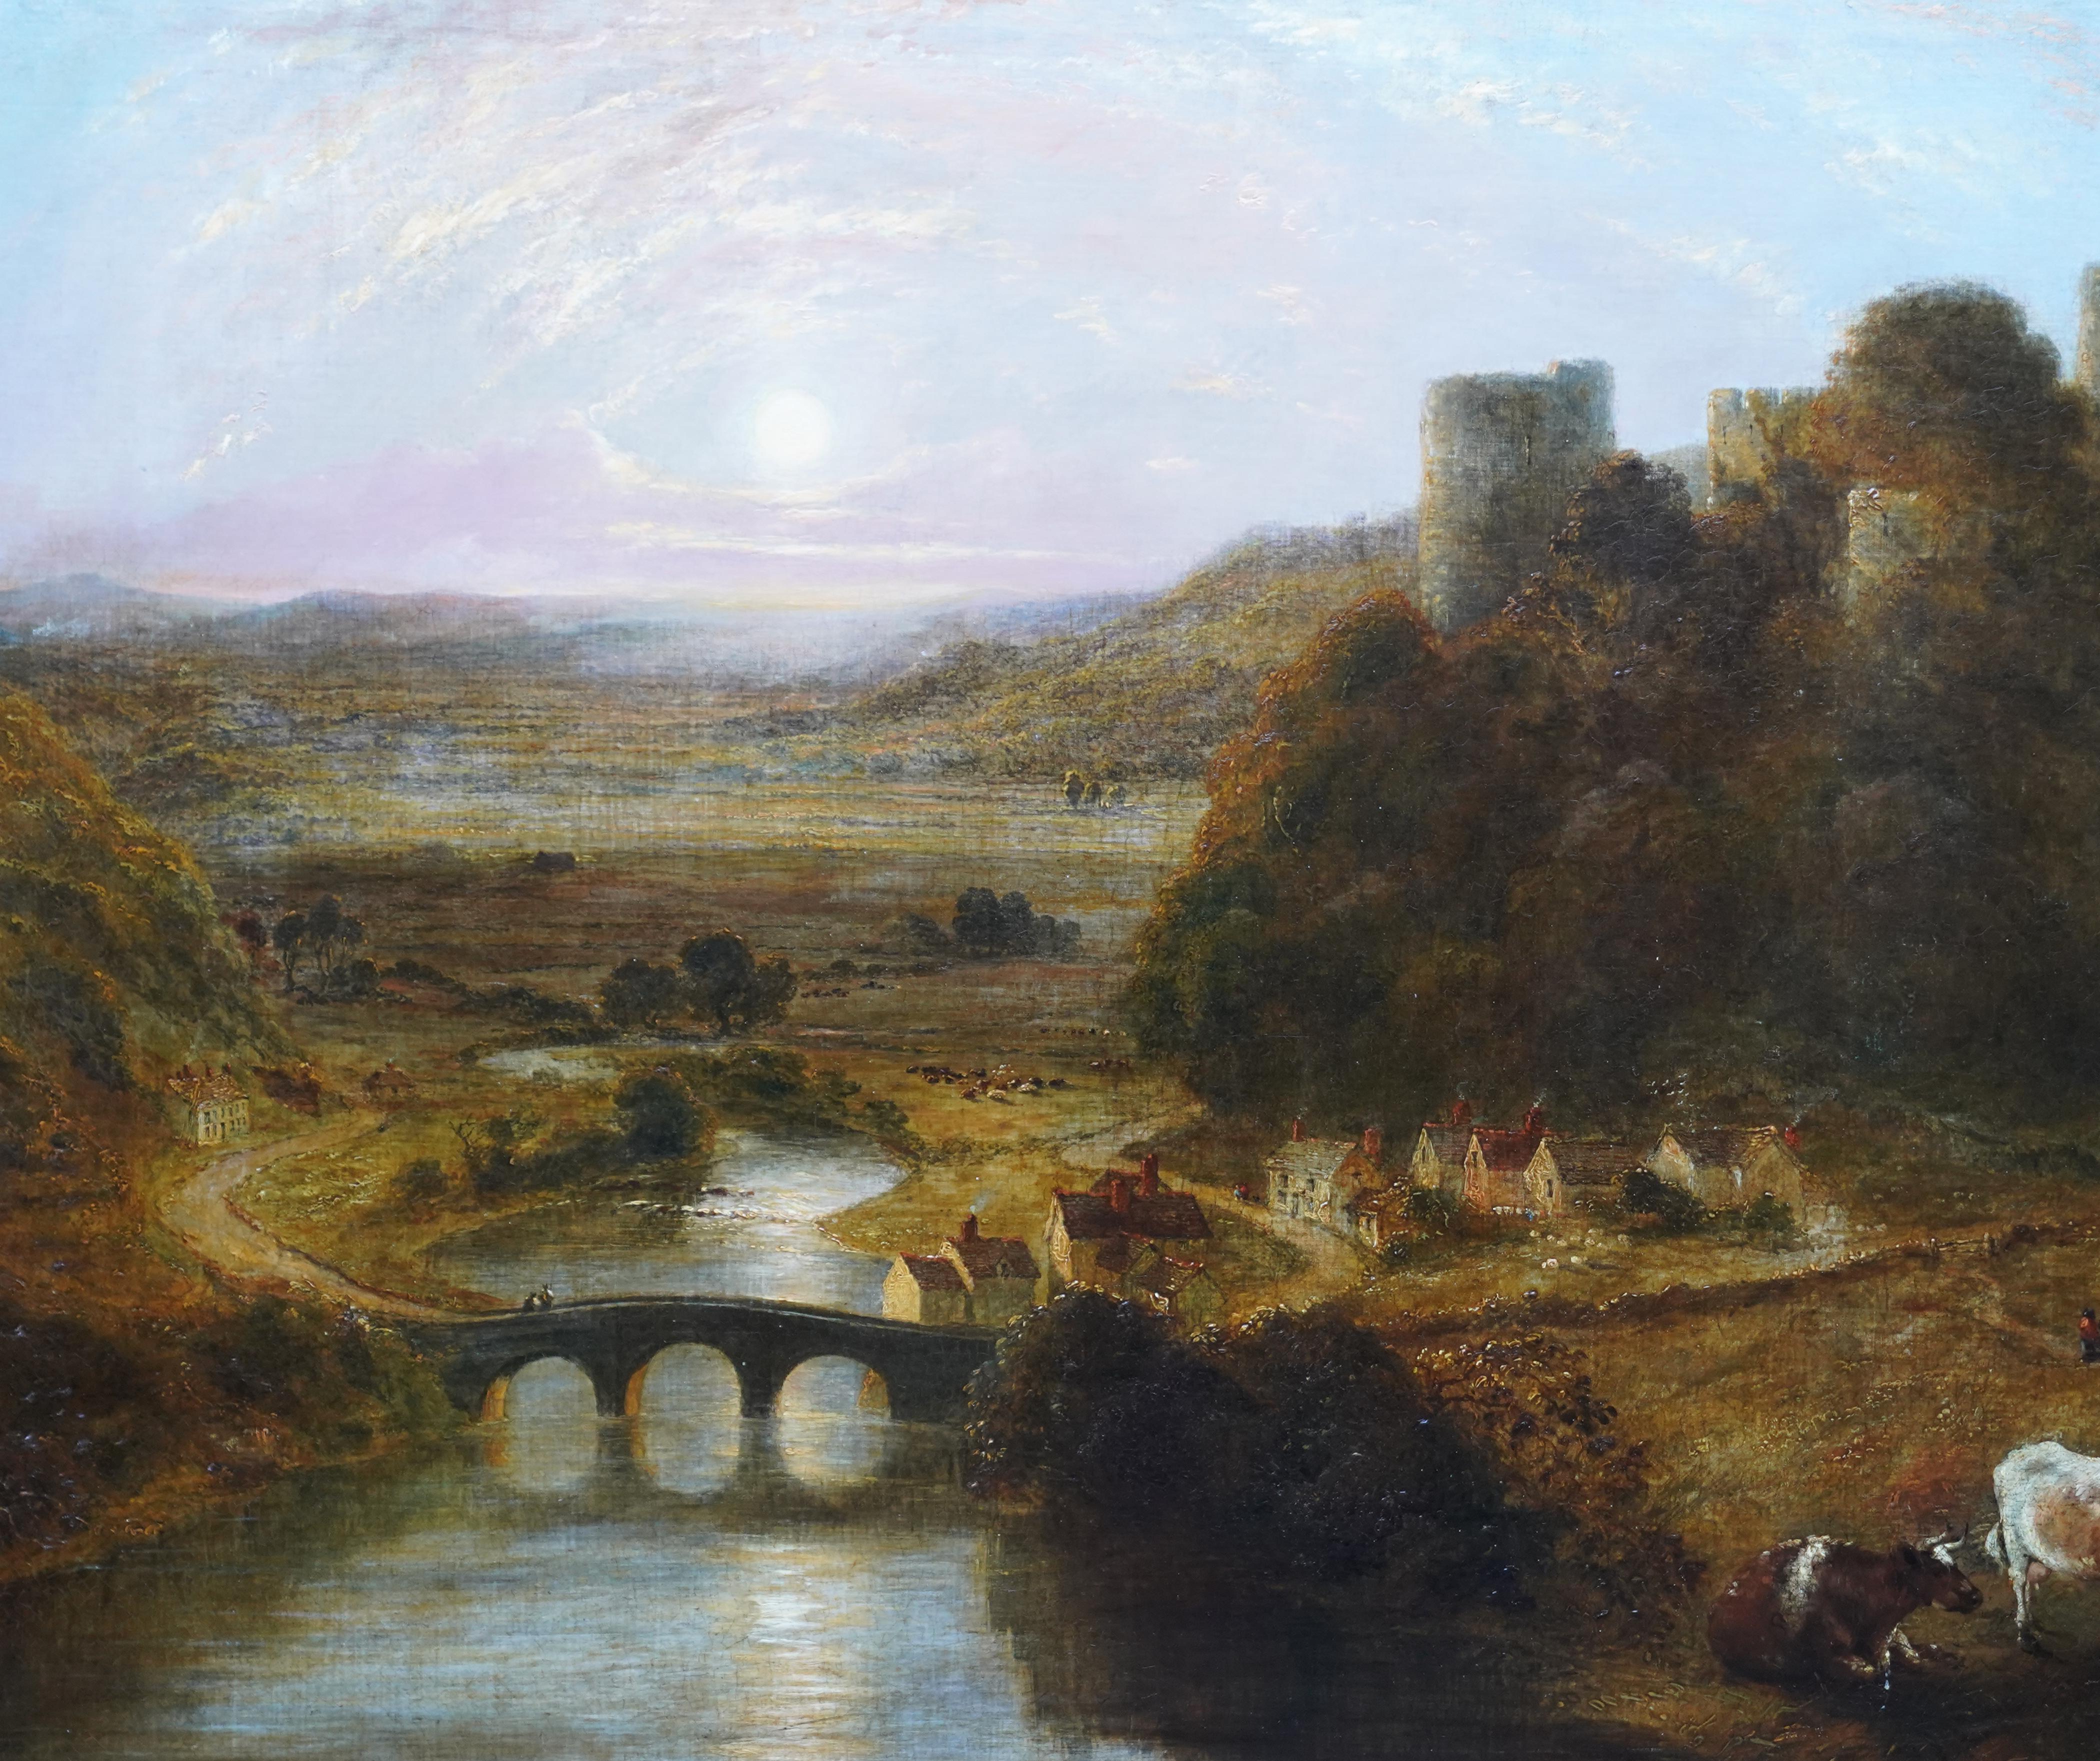 Castle and River Landscape - British 19thC art oil painting follower of Turner - Old Masters Painting by George Mote